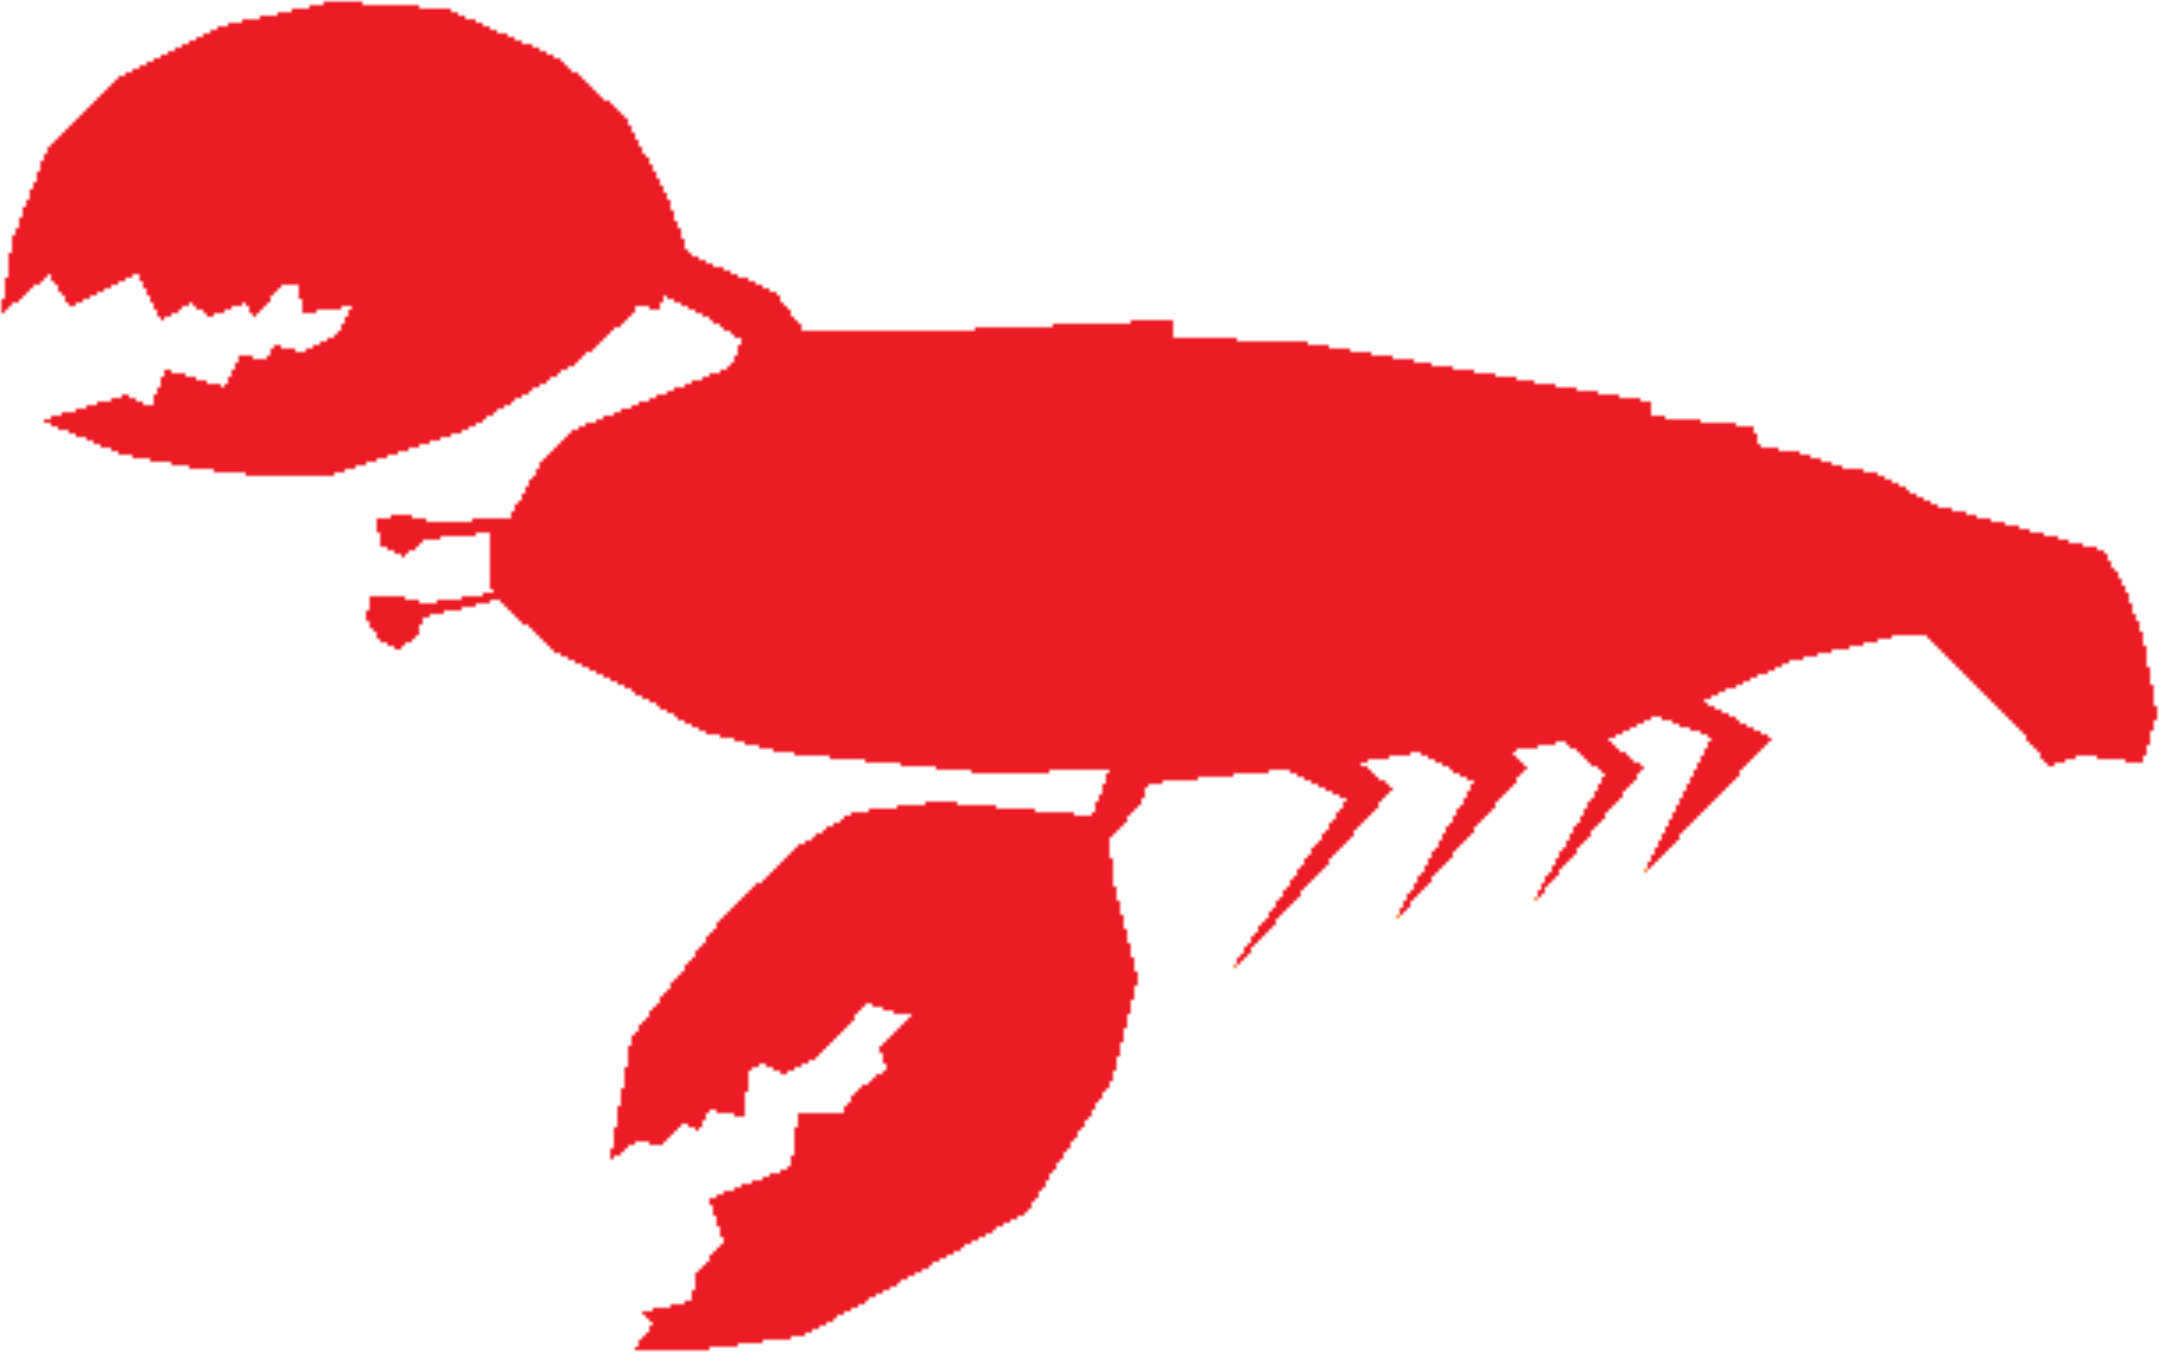 A Red Lobster With A Black Background